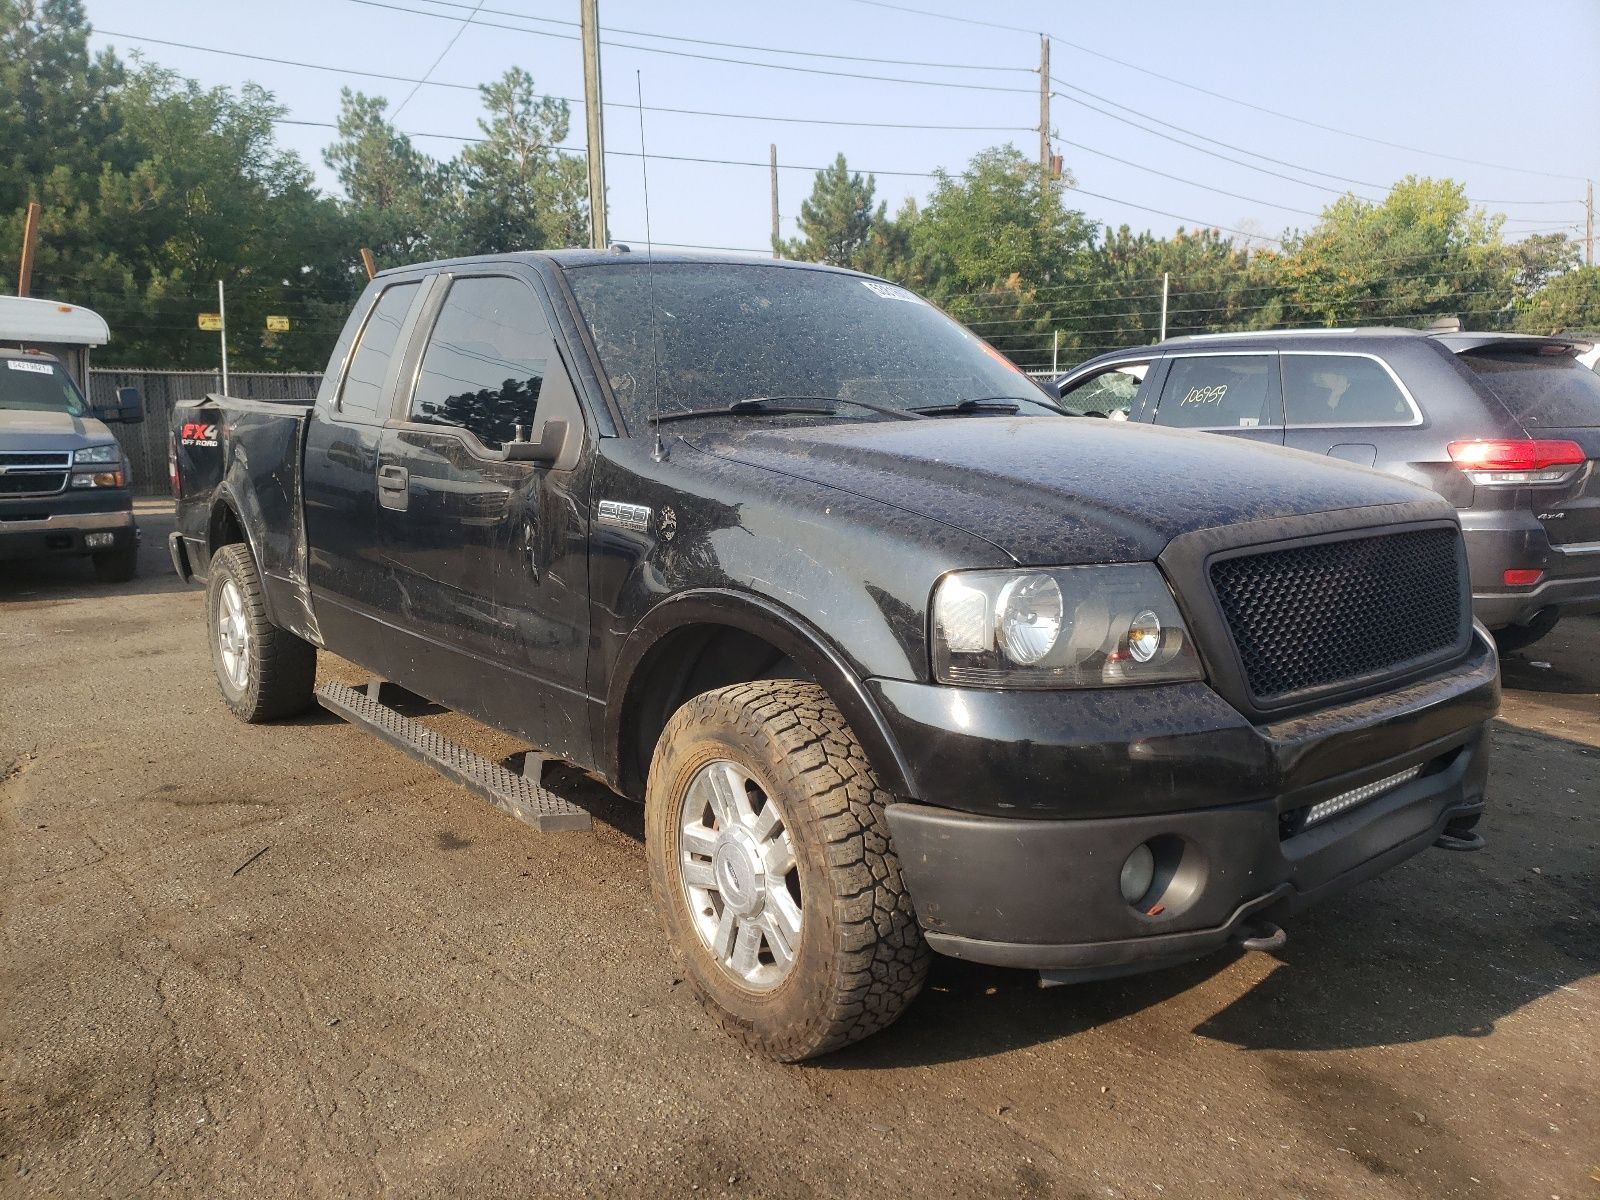 1 of 1FTPX14V47FA14268 Ford f series 2007